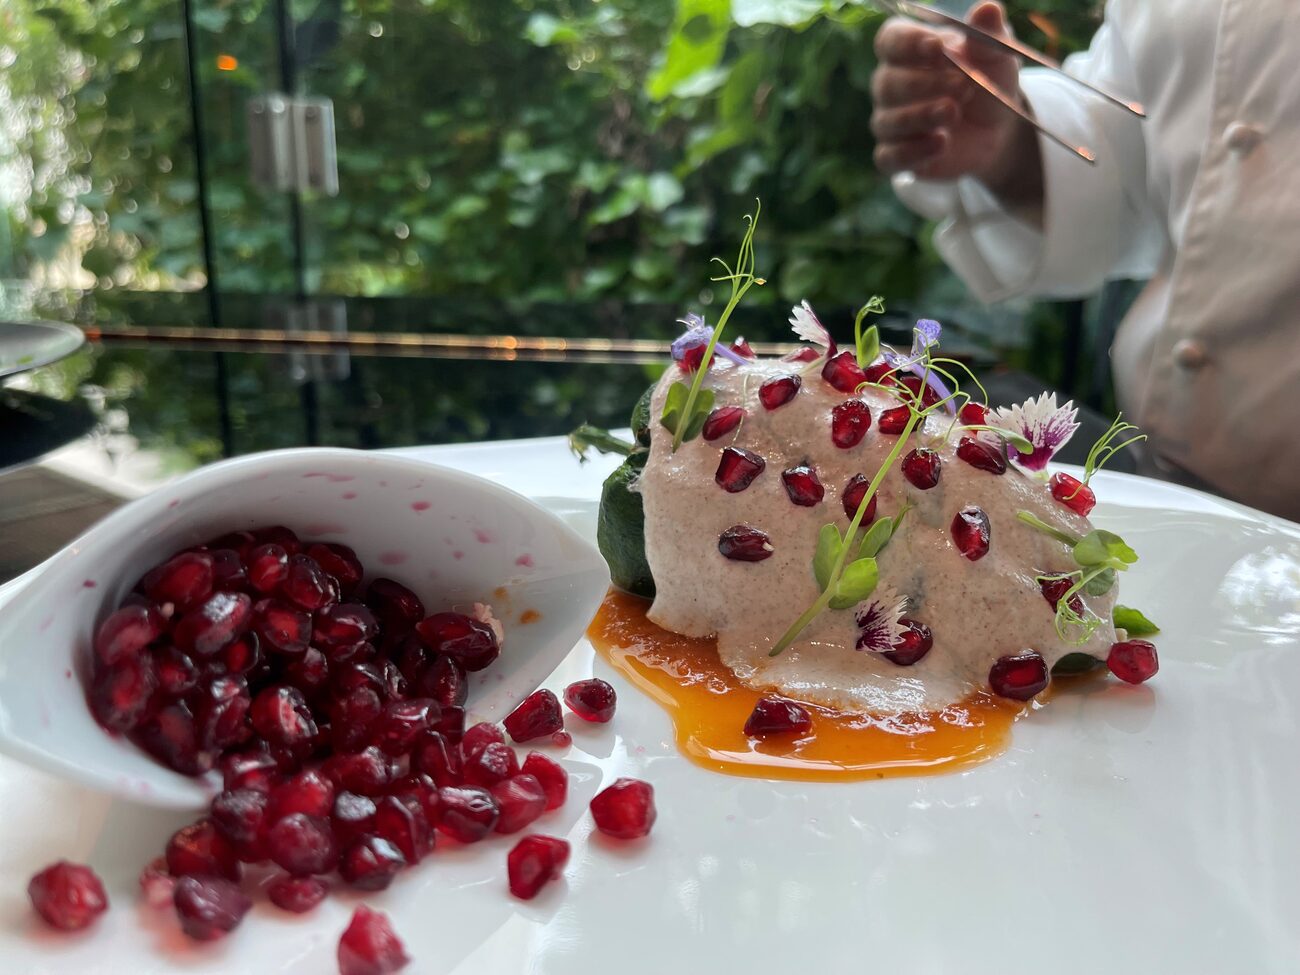 Dish with pomegranate seeds